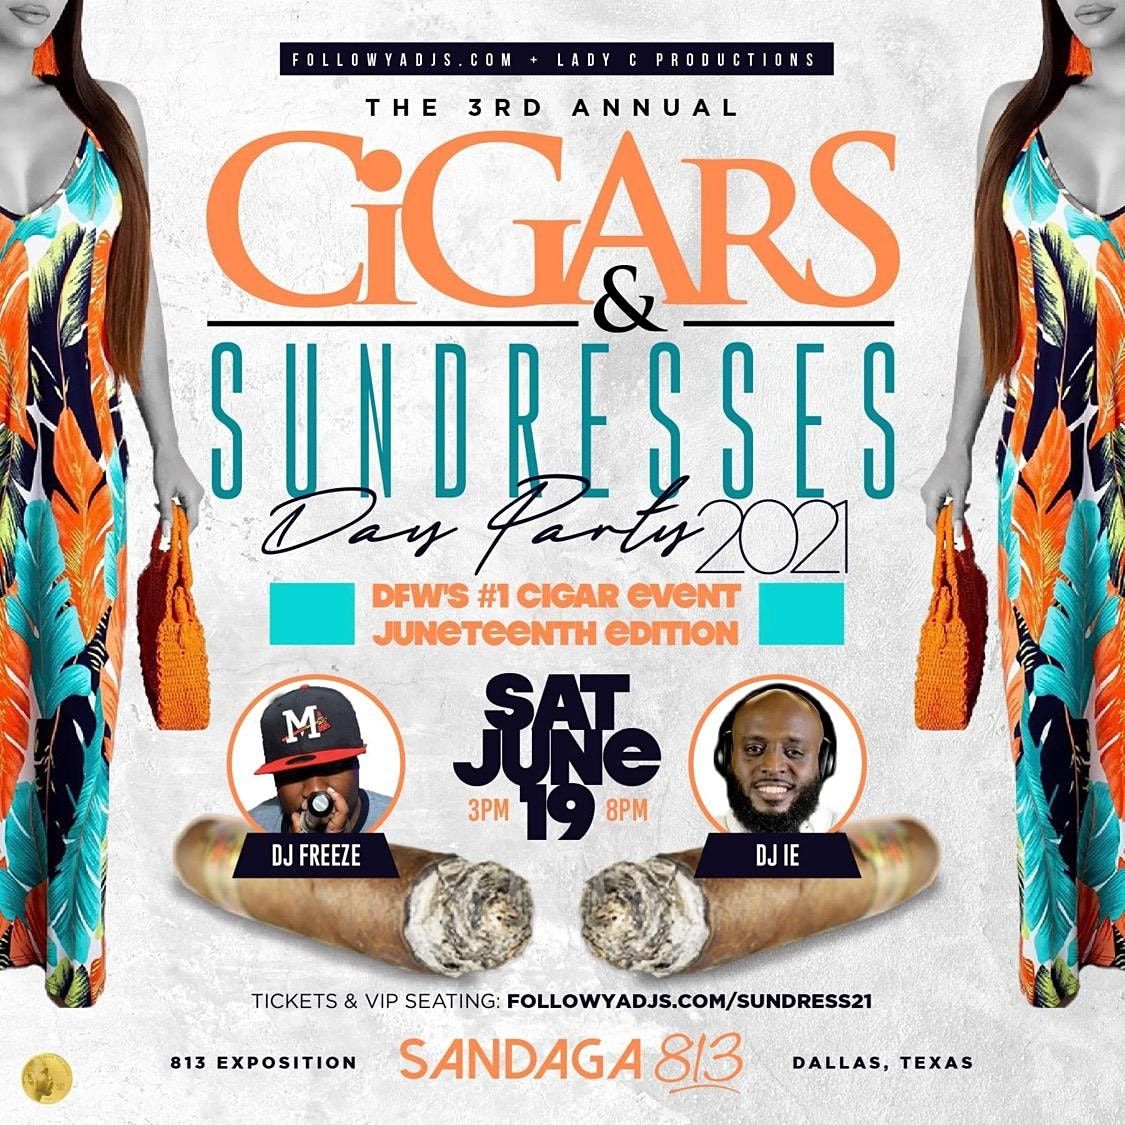 Cigars & Sundresses Day Party 2021